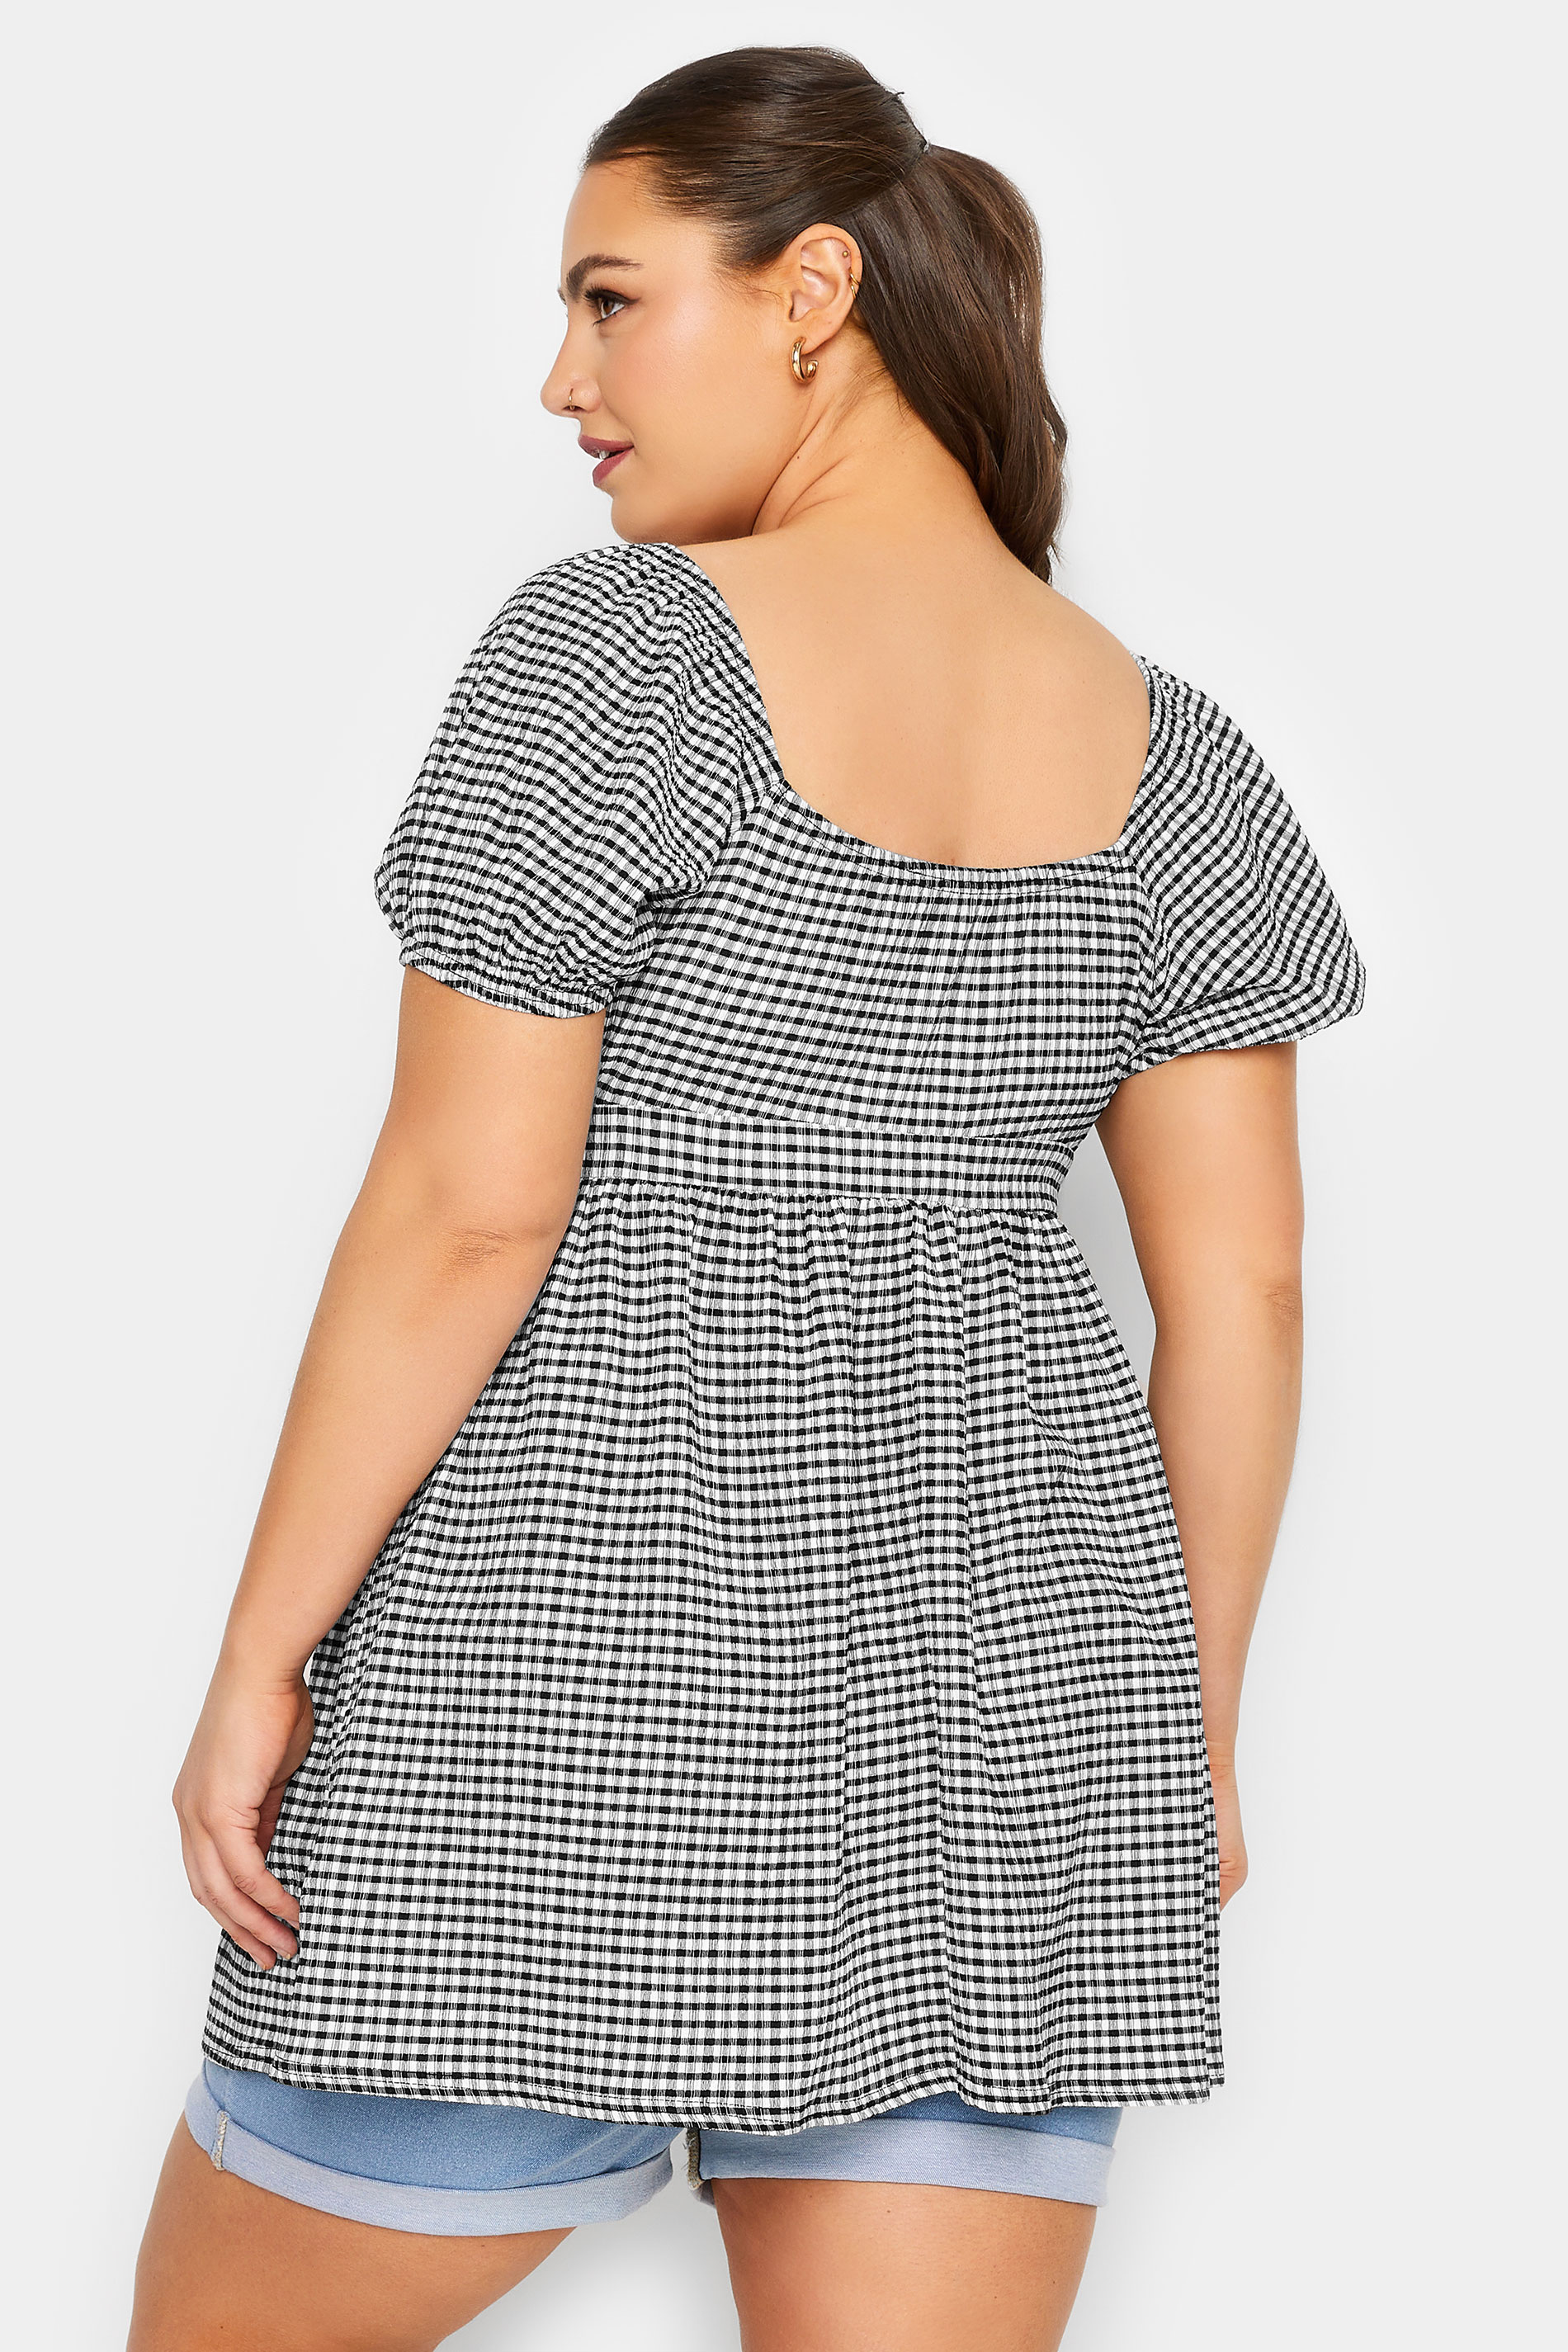 LIMITED COLLECTION Plus Size Black Gingham Gypsy Top | Yours Clothing 3